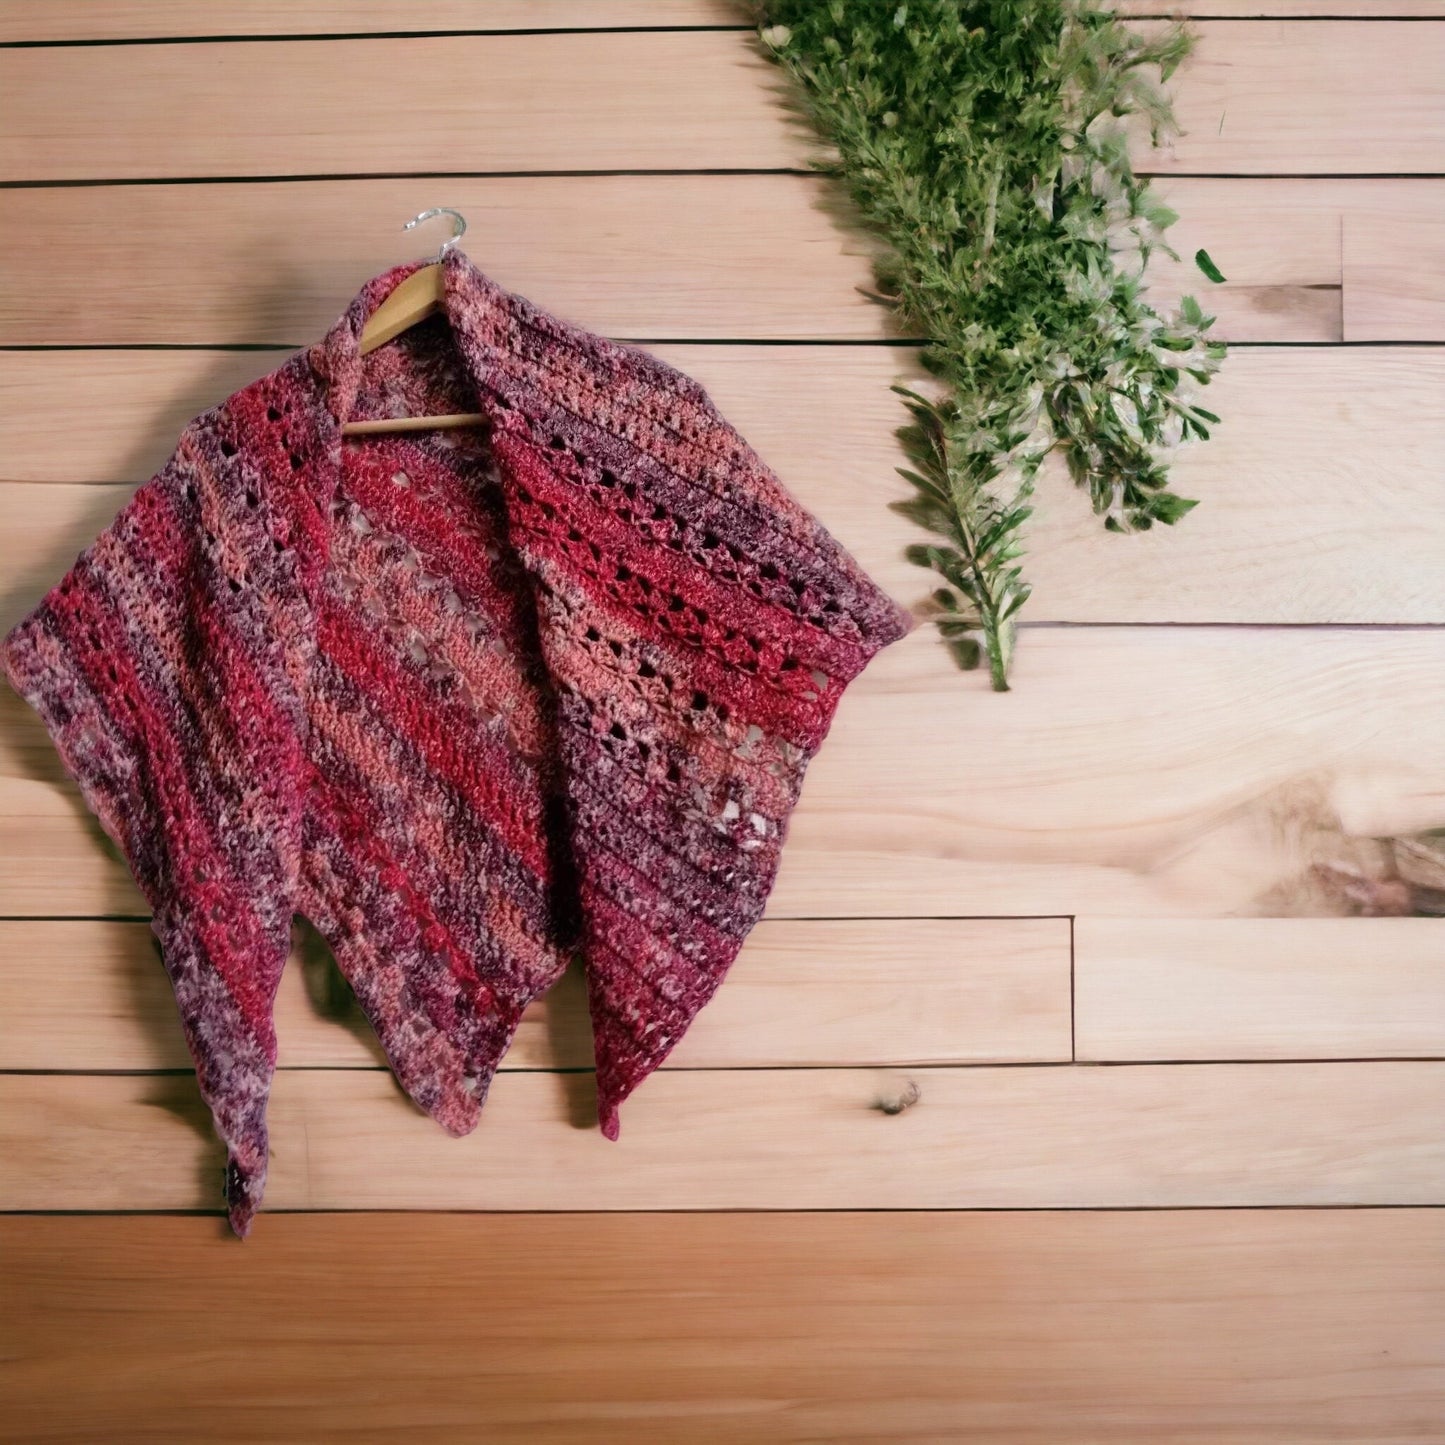 An image of 'Berry Stripe Crochet Shawl' where you can see the full striped design.